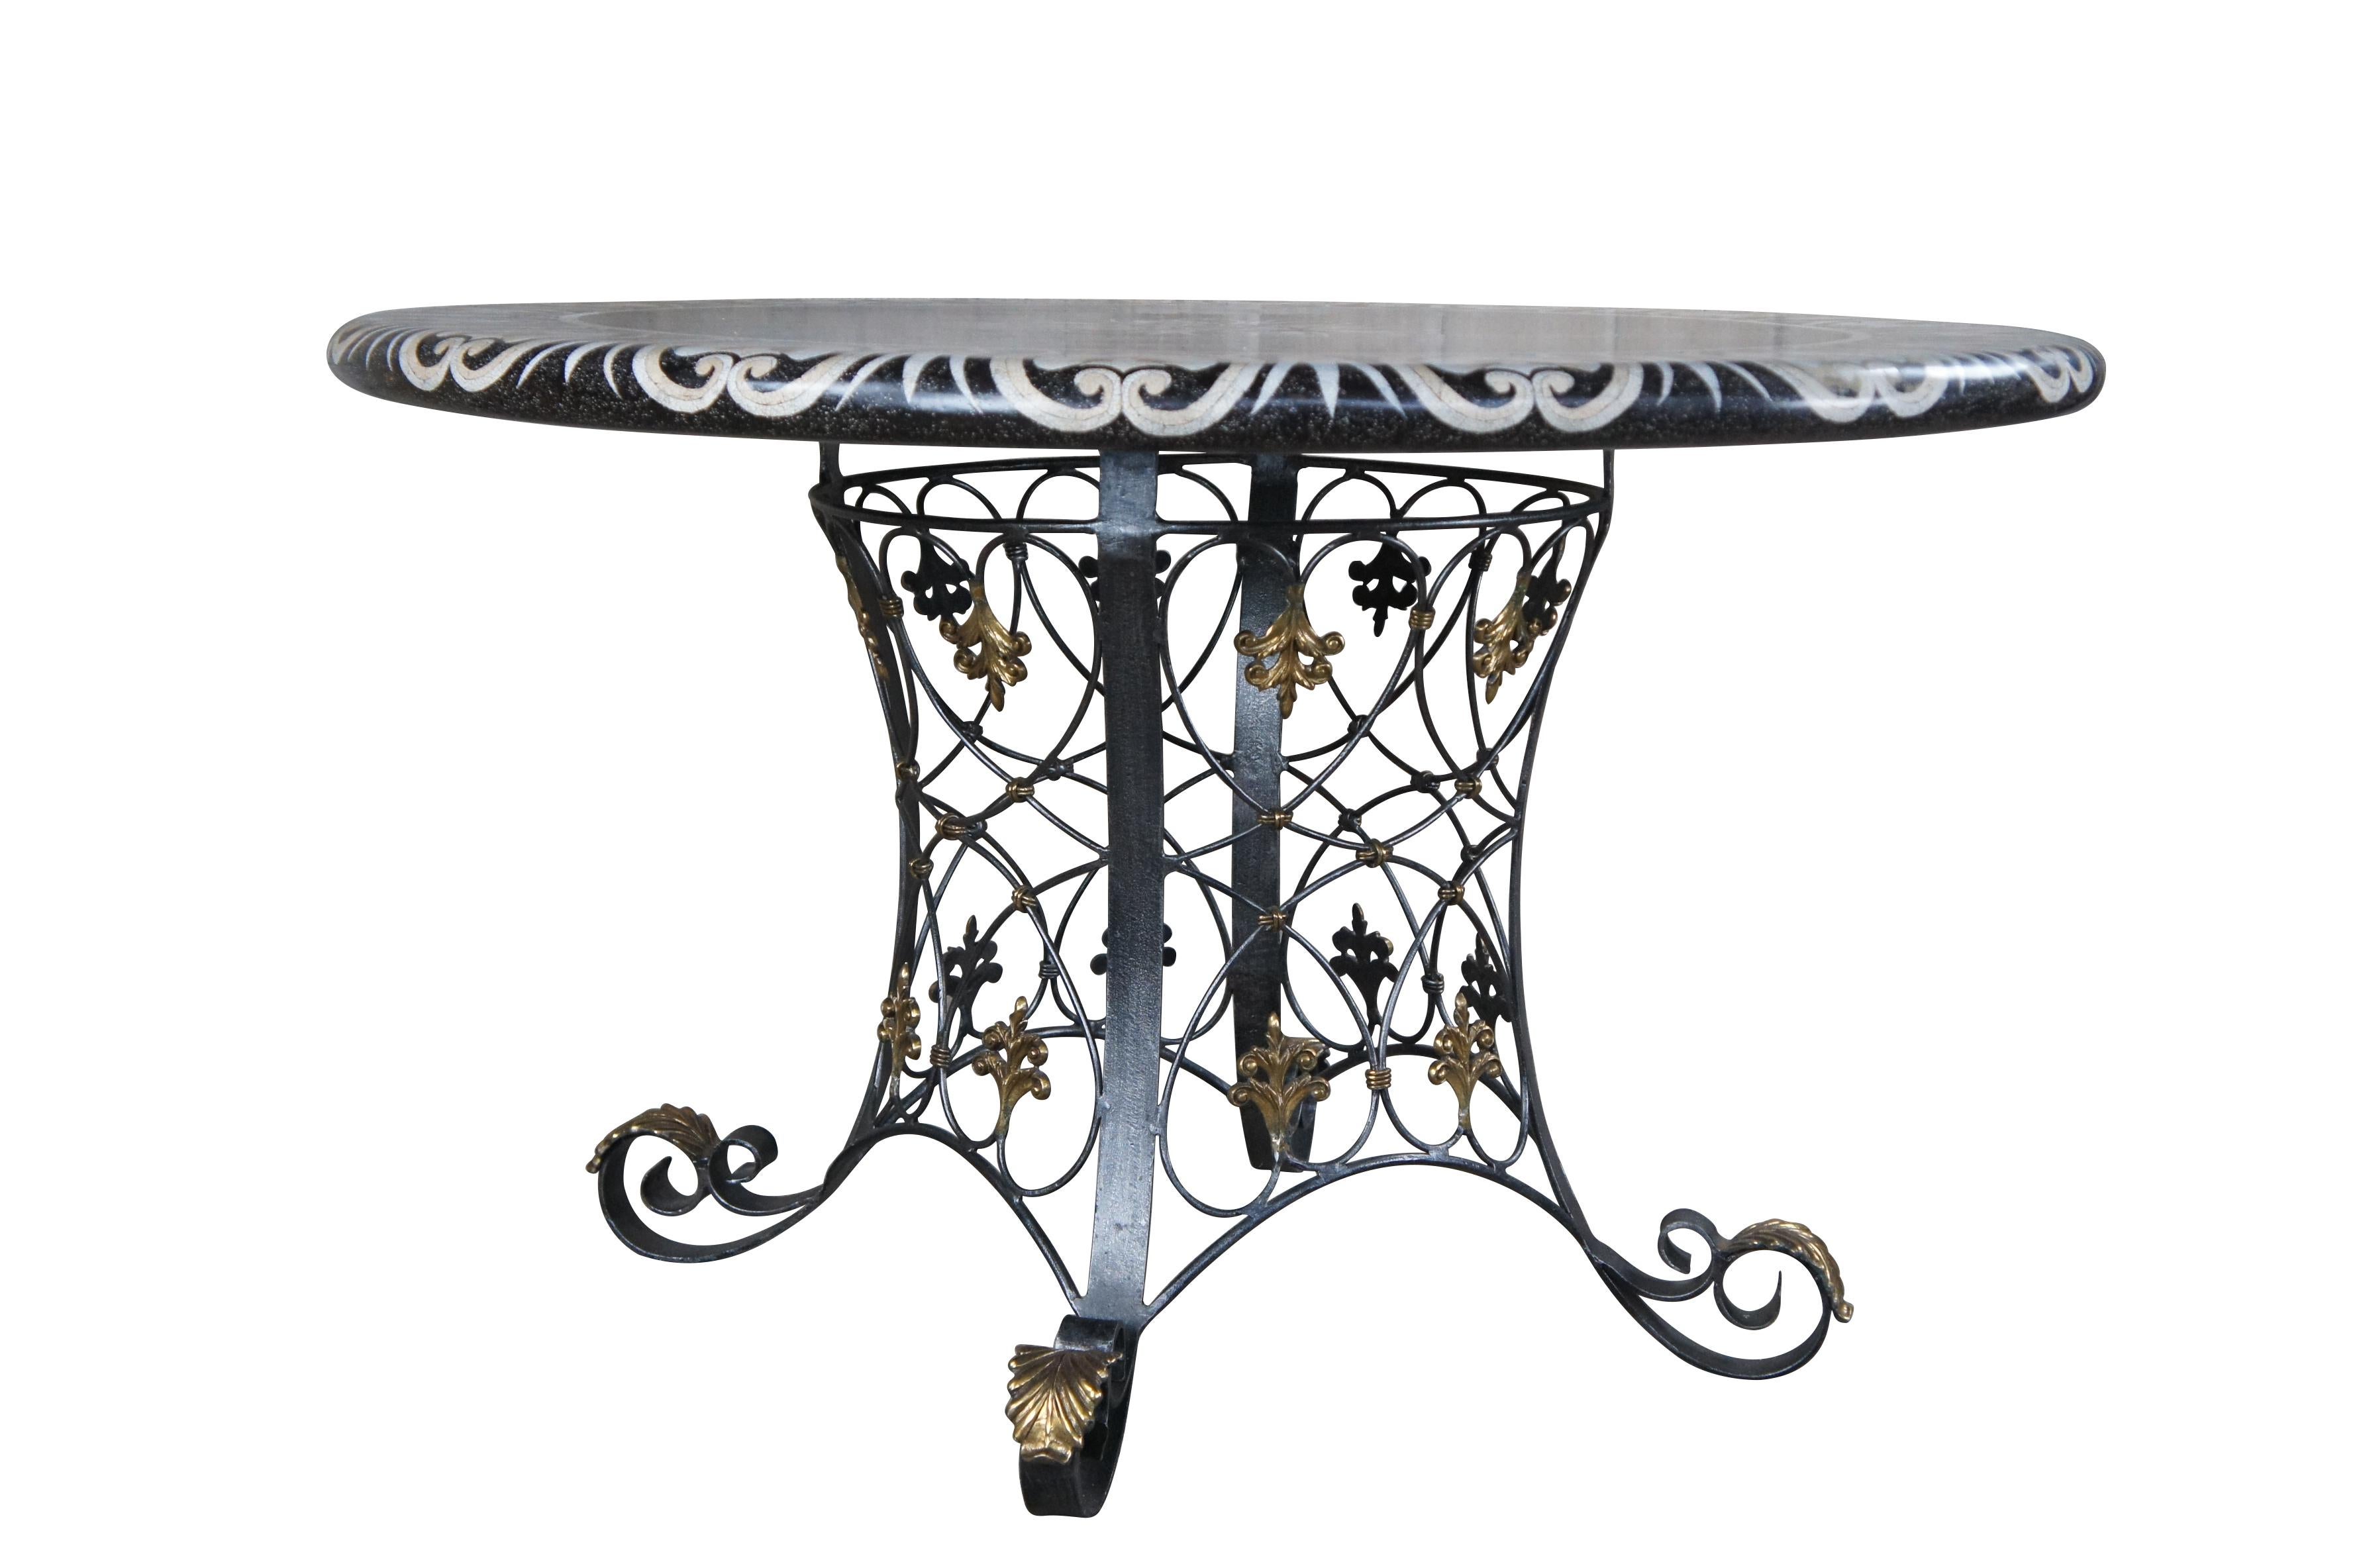 An eye catching handmade Breakfast, Centre or Foyer table by Maitland Smith, circa 1990s. Features a rounded top with inlaid and tessellated stone in the shape of shells and tulips.  The table is supported by an intricate iron base with lattice form